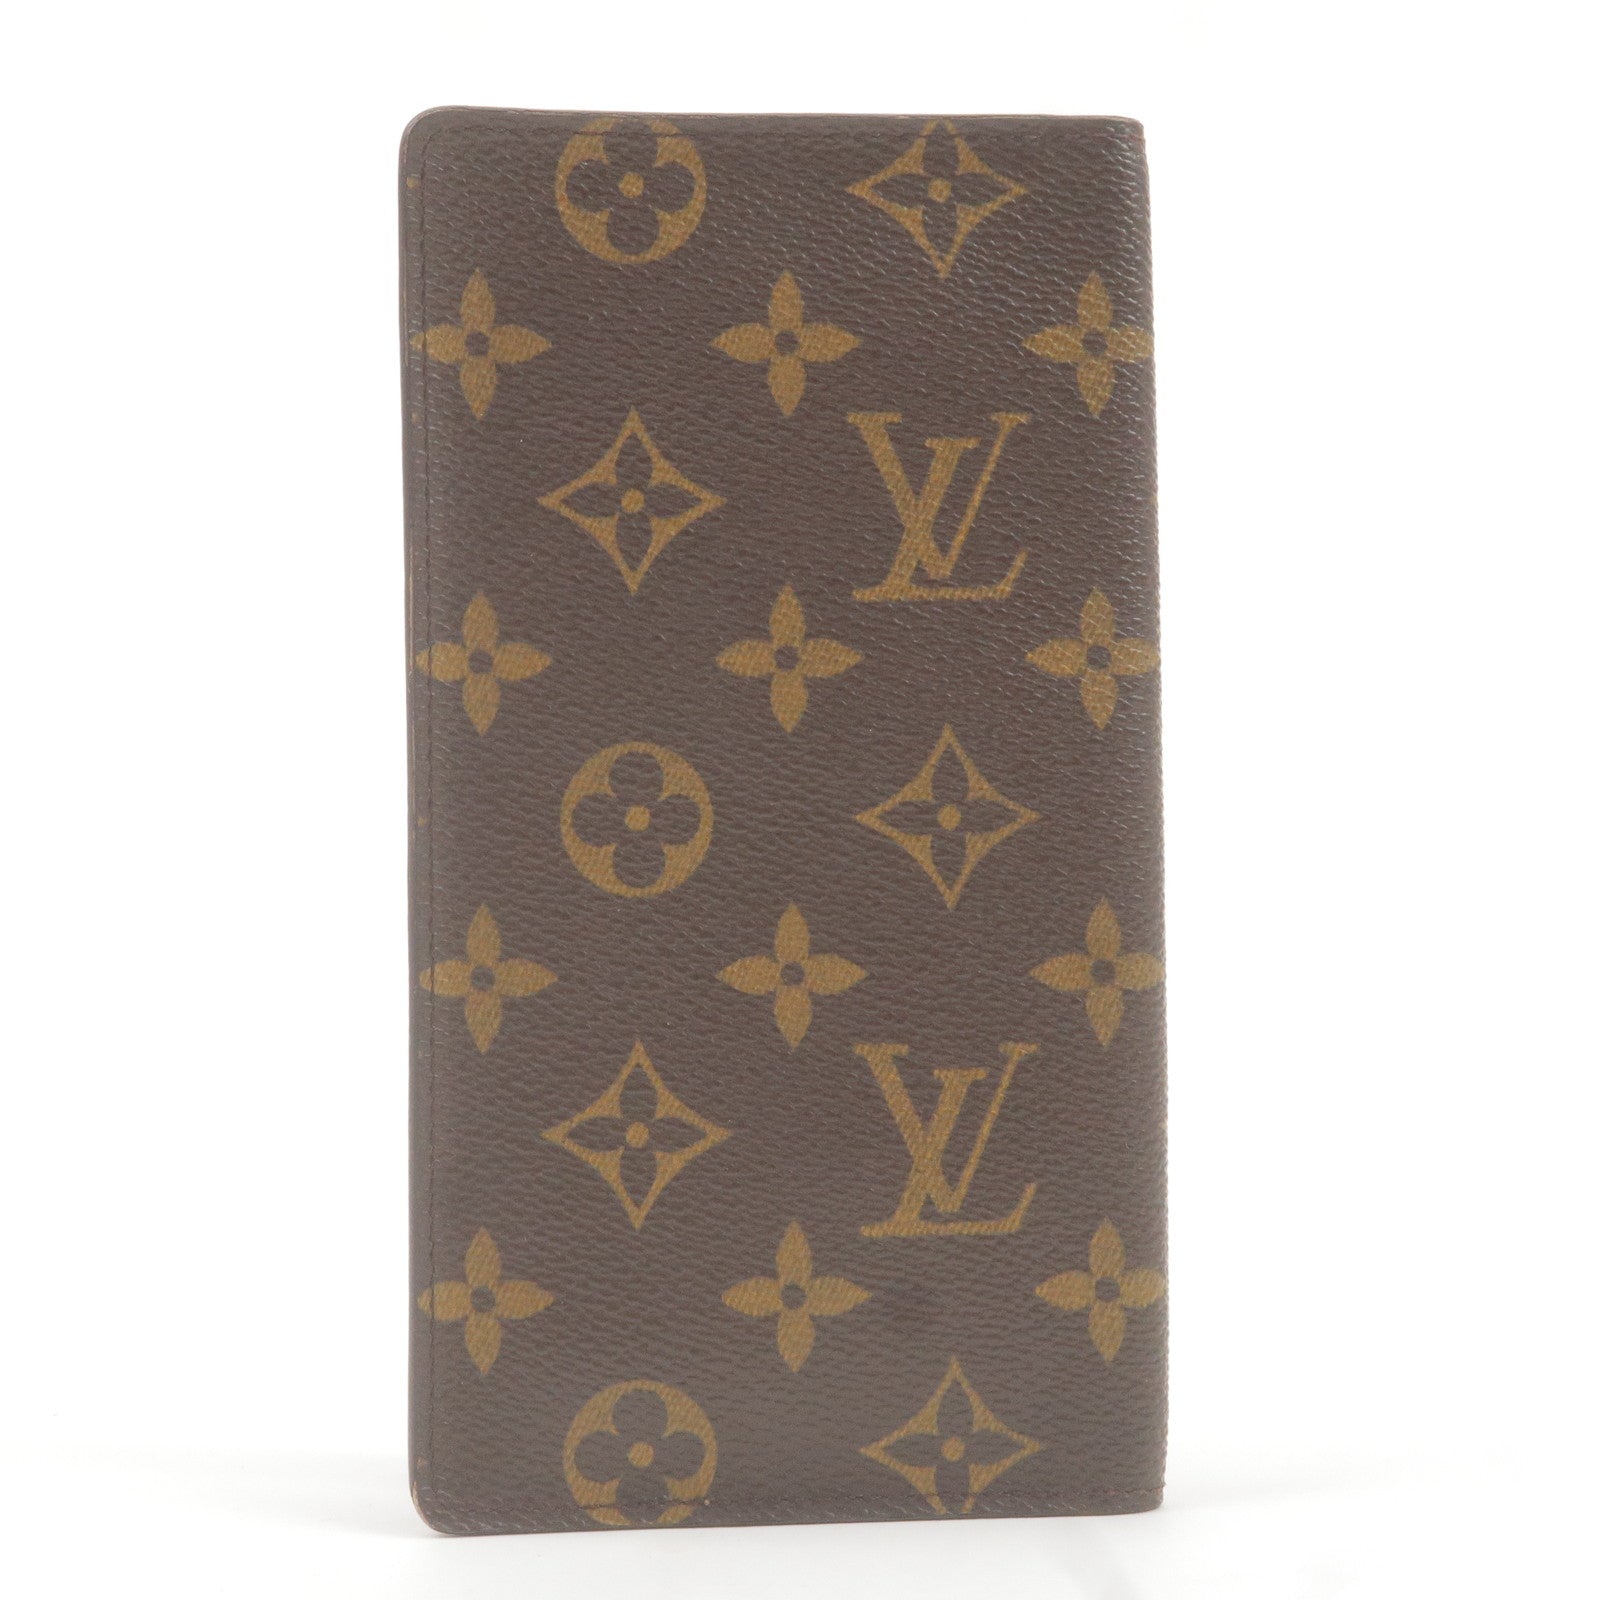 100% Authentic Louis Vuitton Long Monogram Wallet Made in France